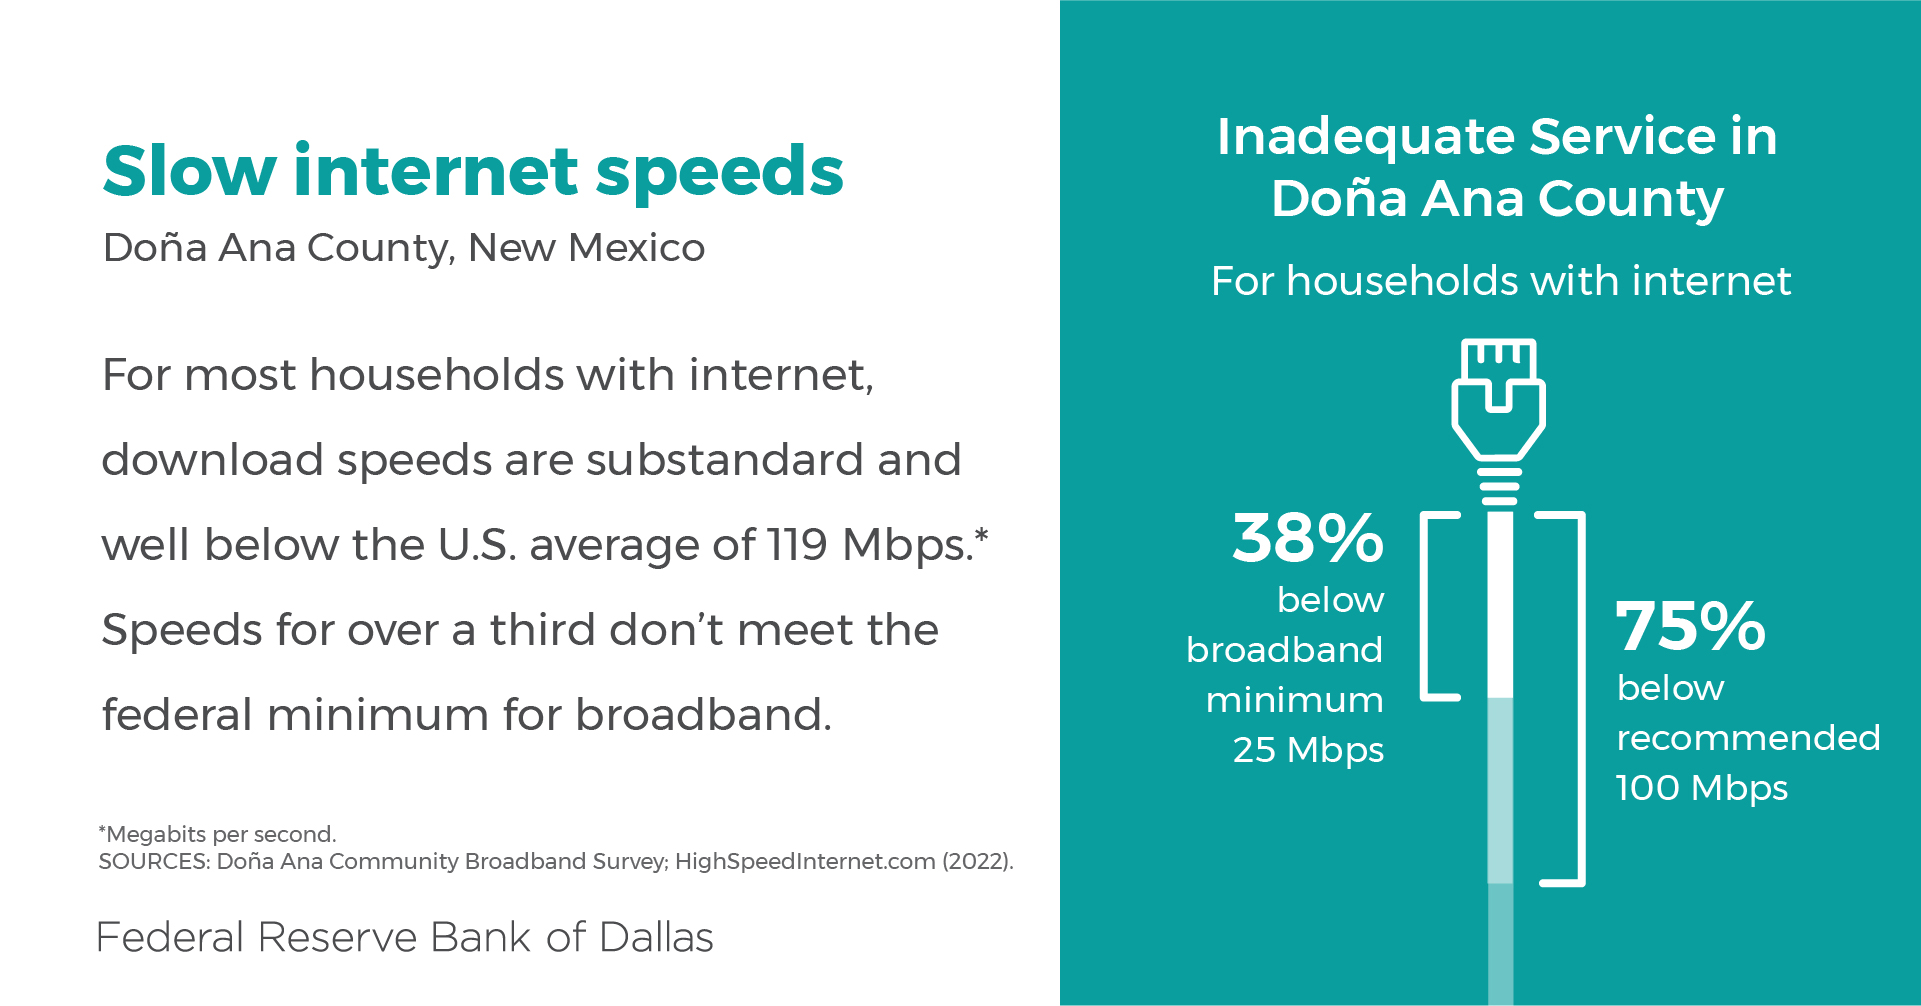 Inadequate service in Doña Ana County, NM, for households with internet